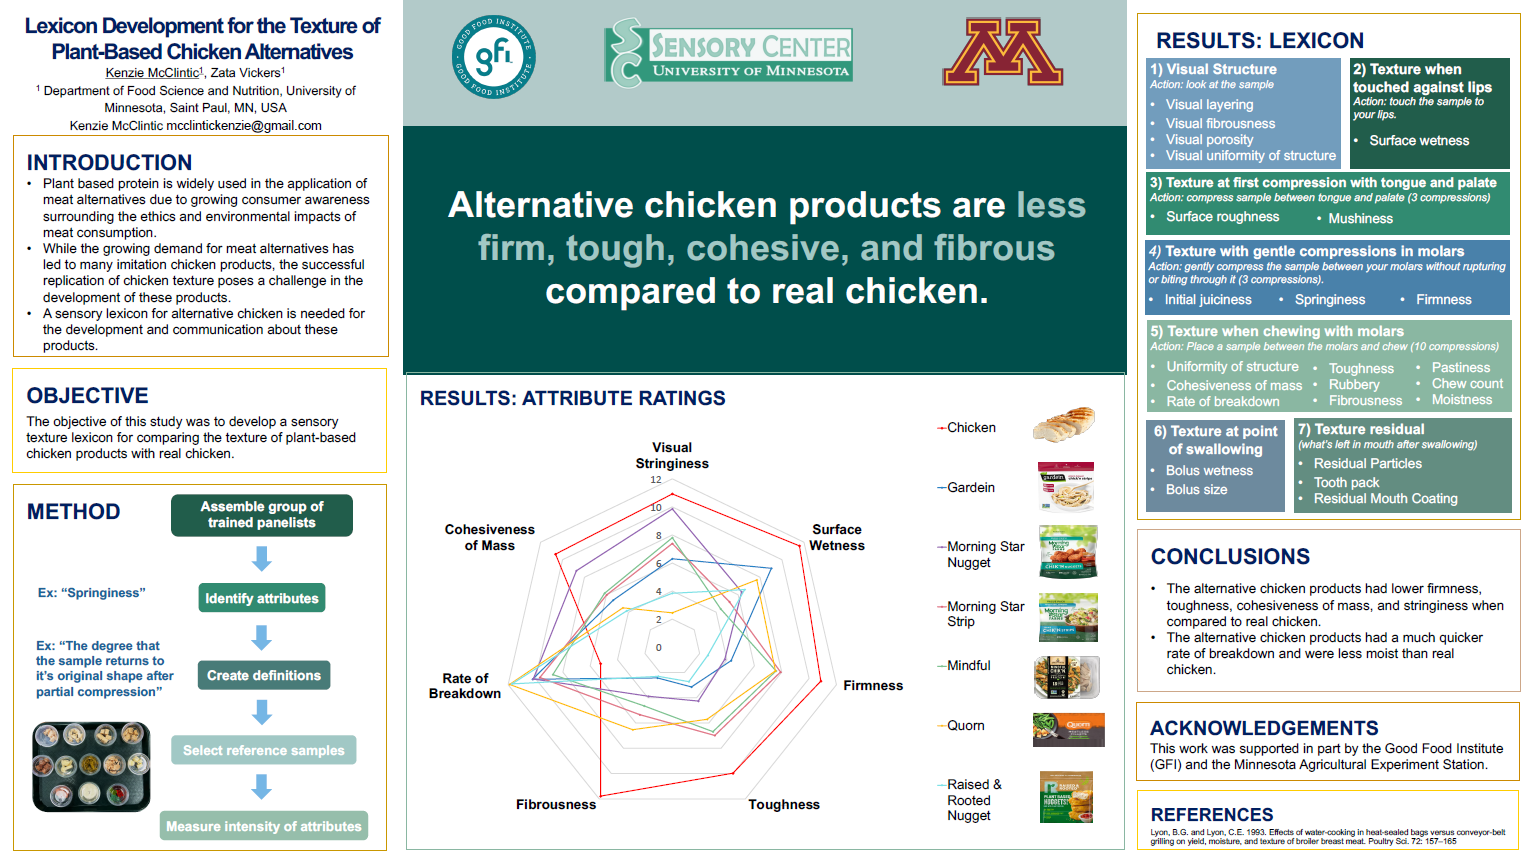 Lexicon development for the texture of plant-based chicken alternatives